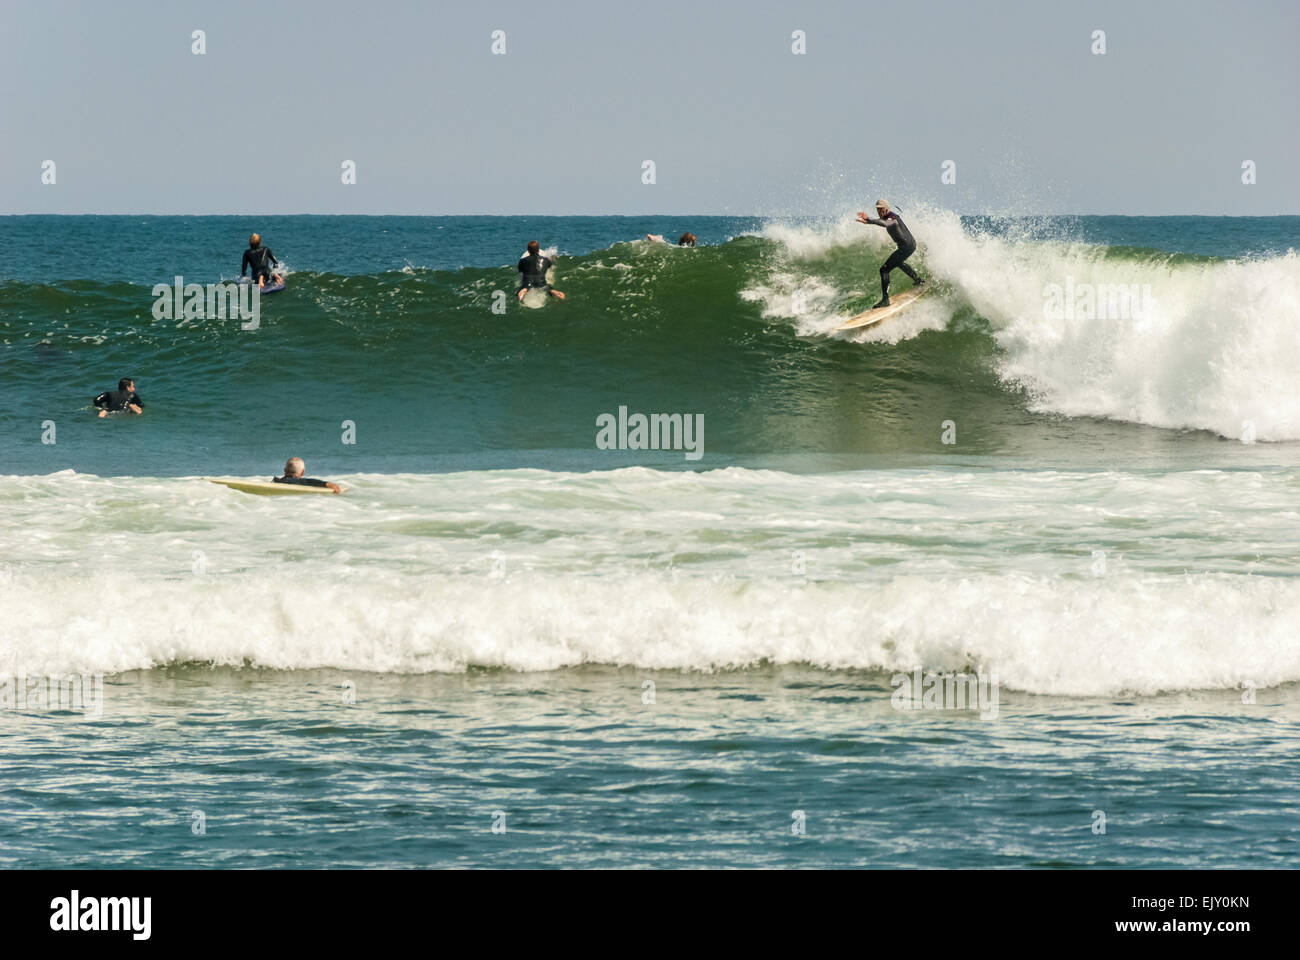 Senior surfer riding a large, clean swell at Surfrider Beach in Malibu, California, USA. Stock Photo